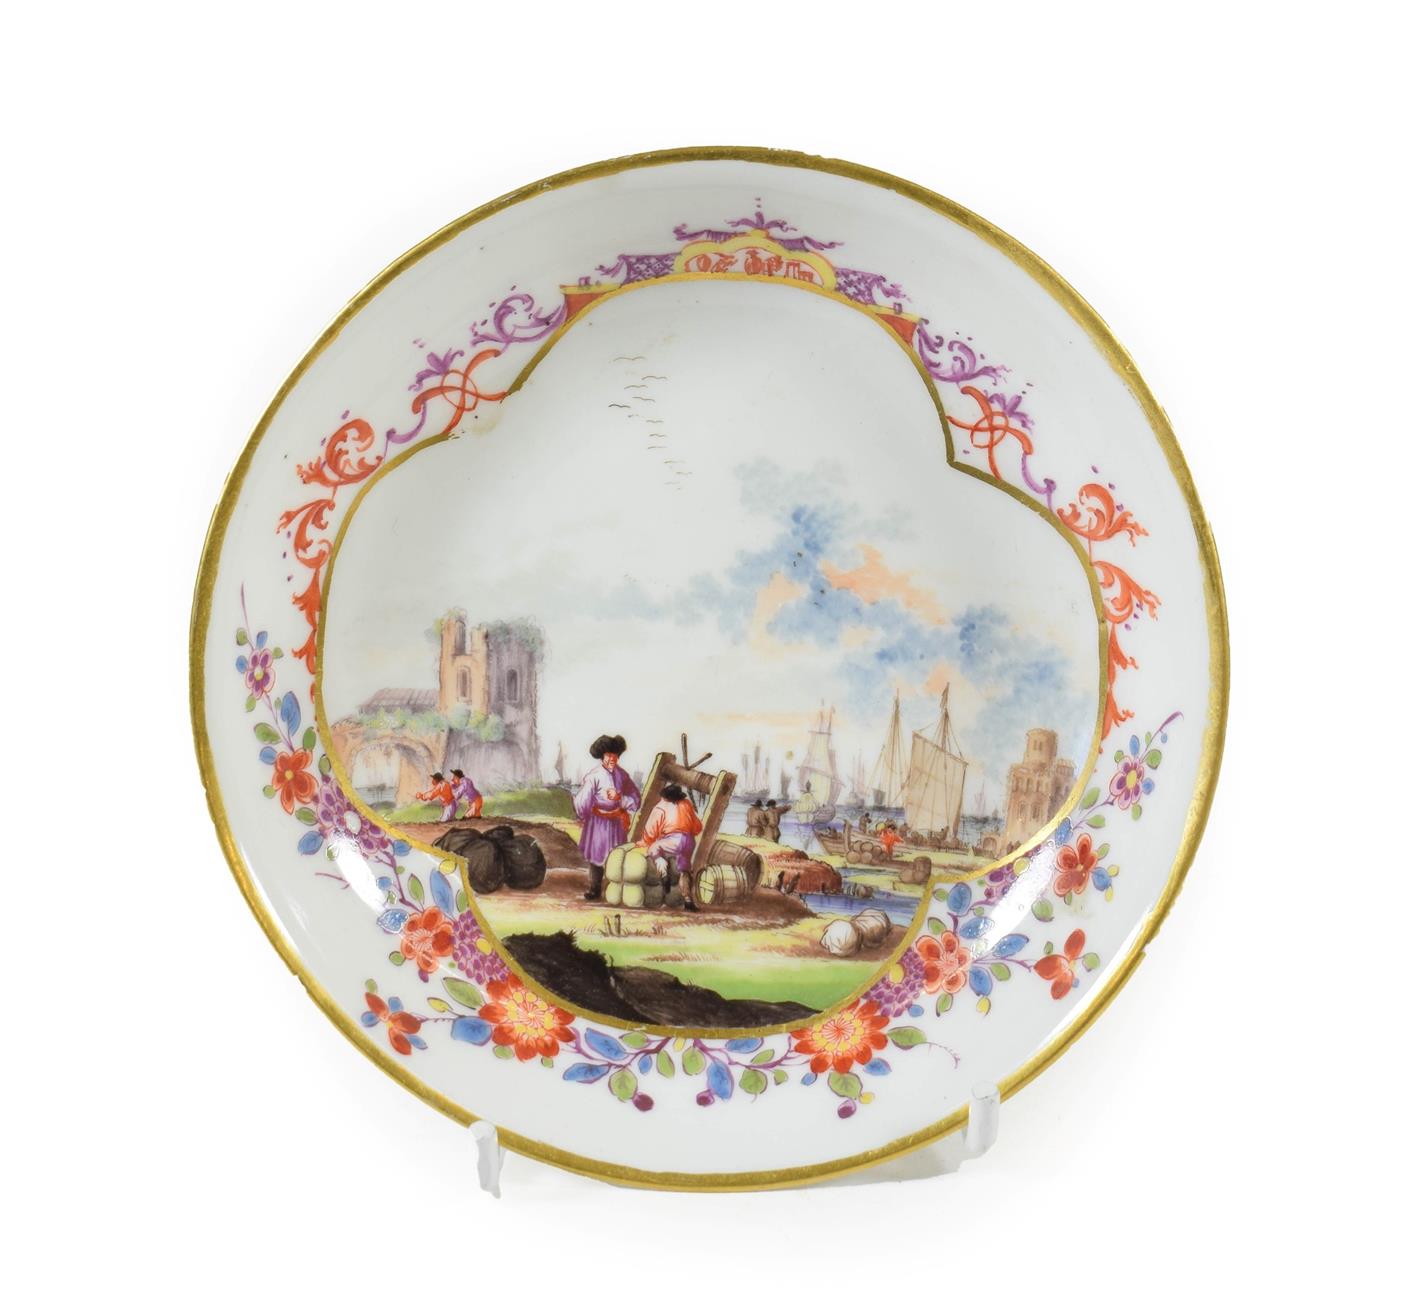 Lot 47 - A Meissen Porcelain Saucer, circa 1730, painted in the manner of Christian Friedrich Herold...